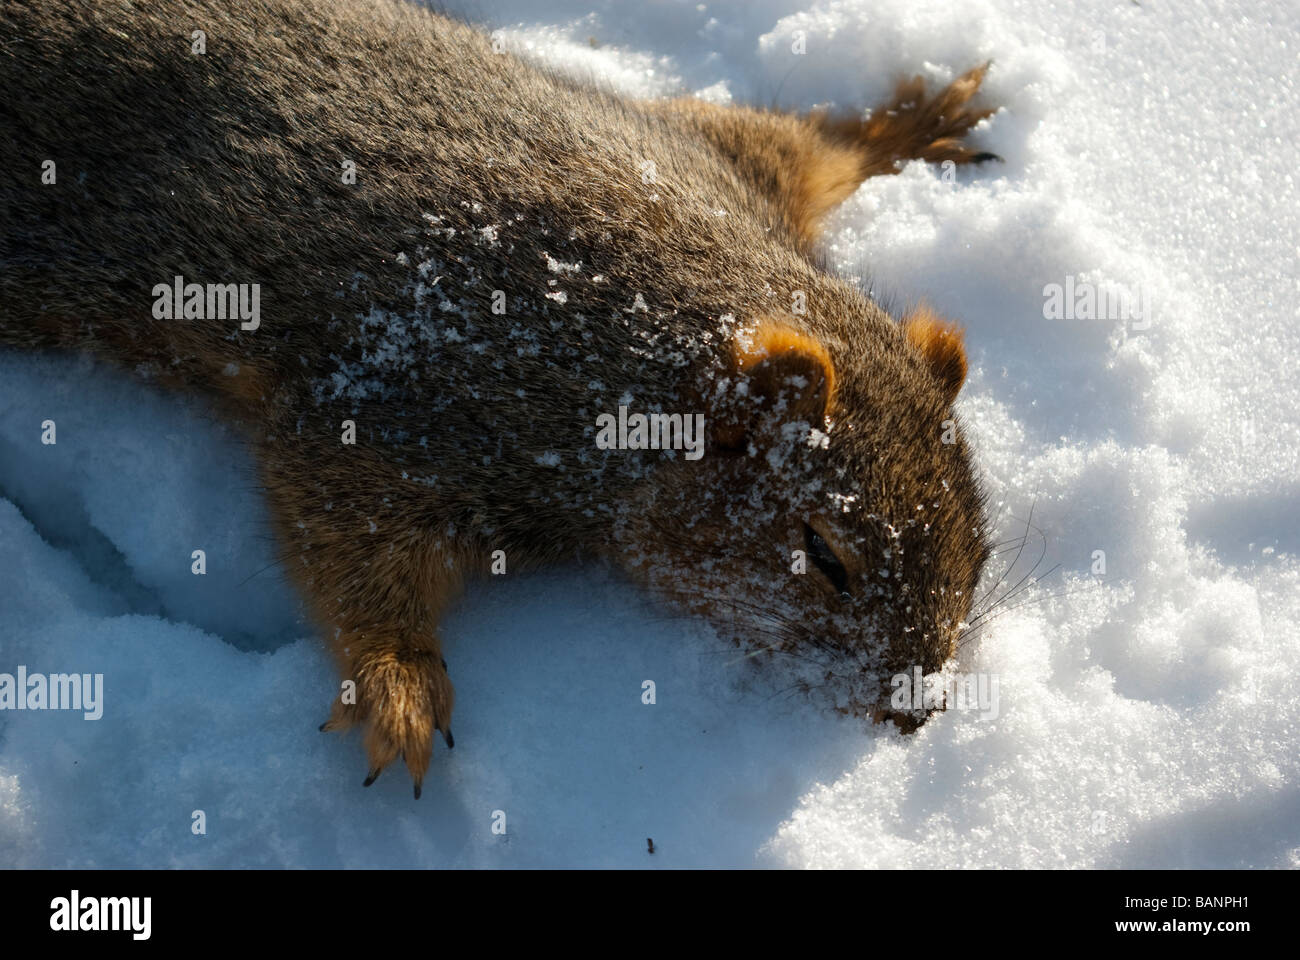 A close view of a squirrel which has made a last attempt to find food and  shelter before collapsing in the freezing weather, and has recently died. Stock Photo